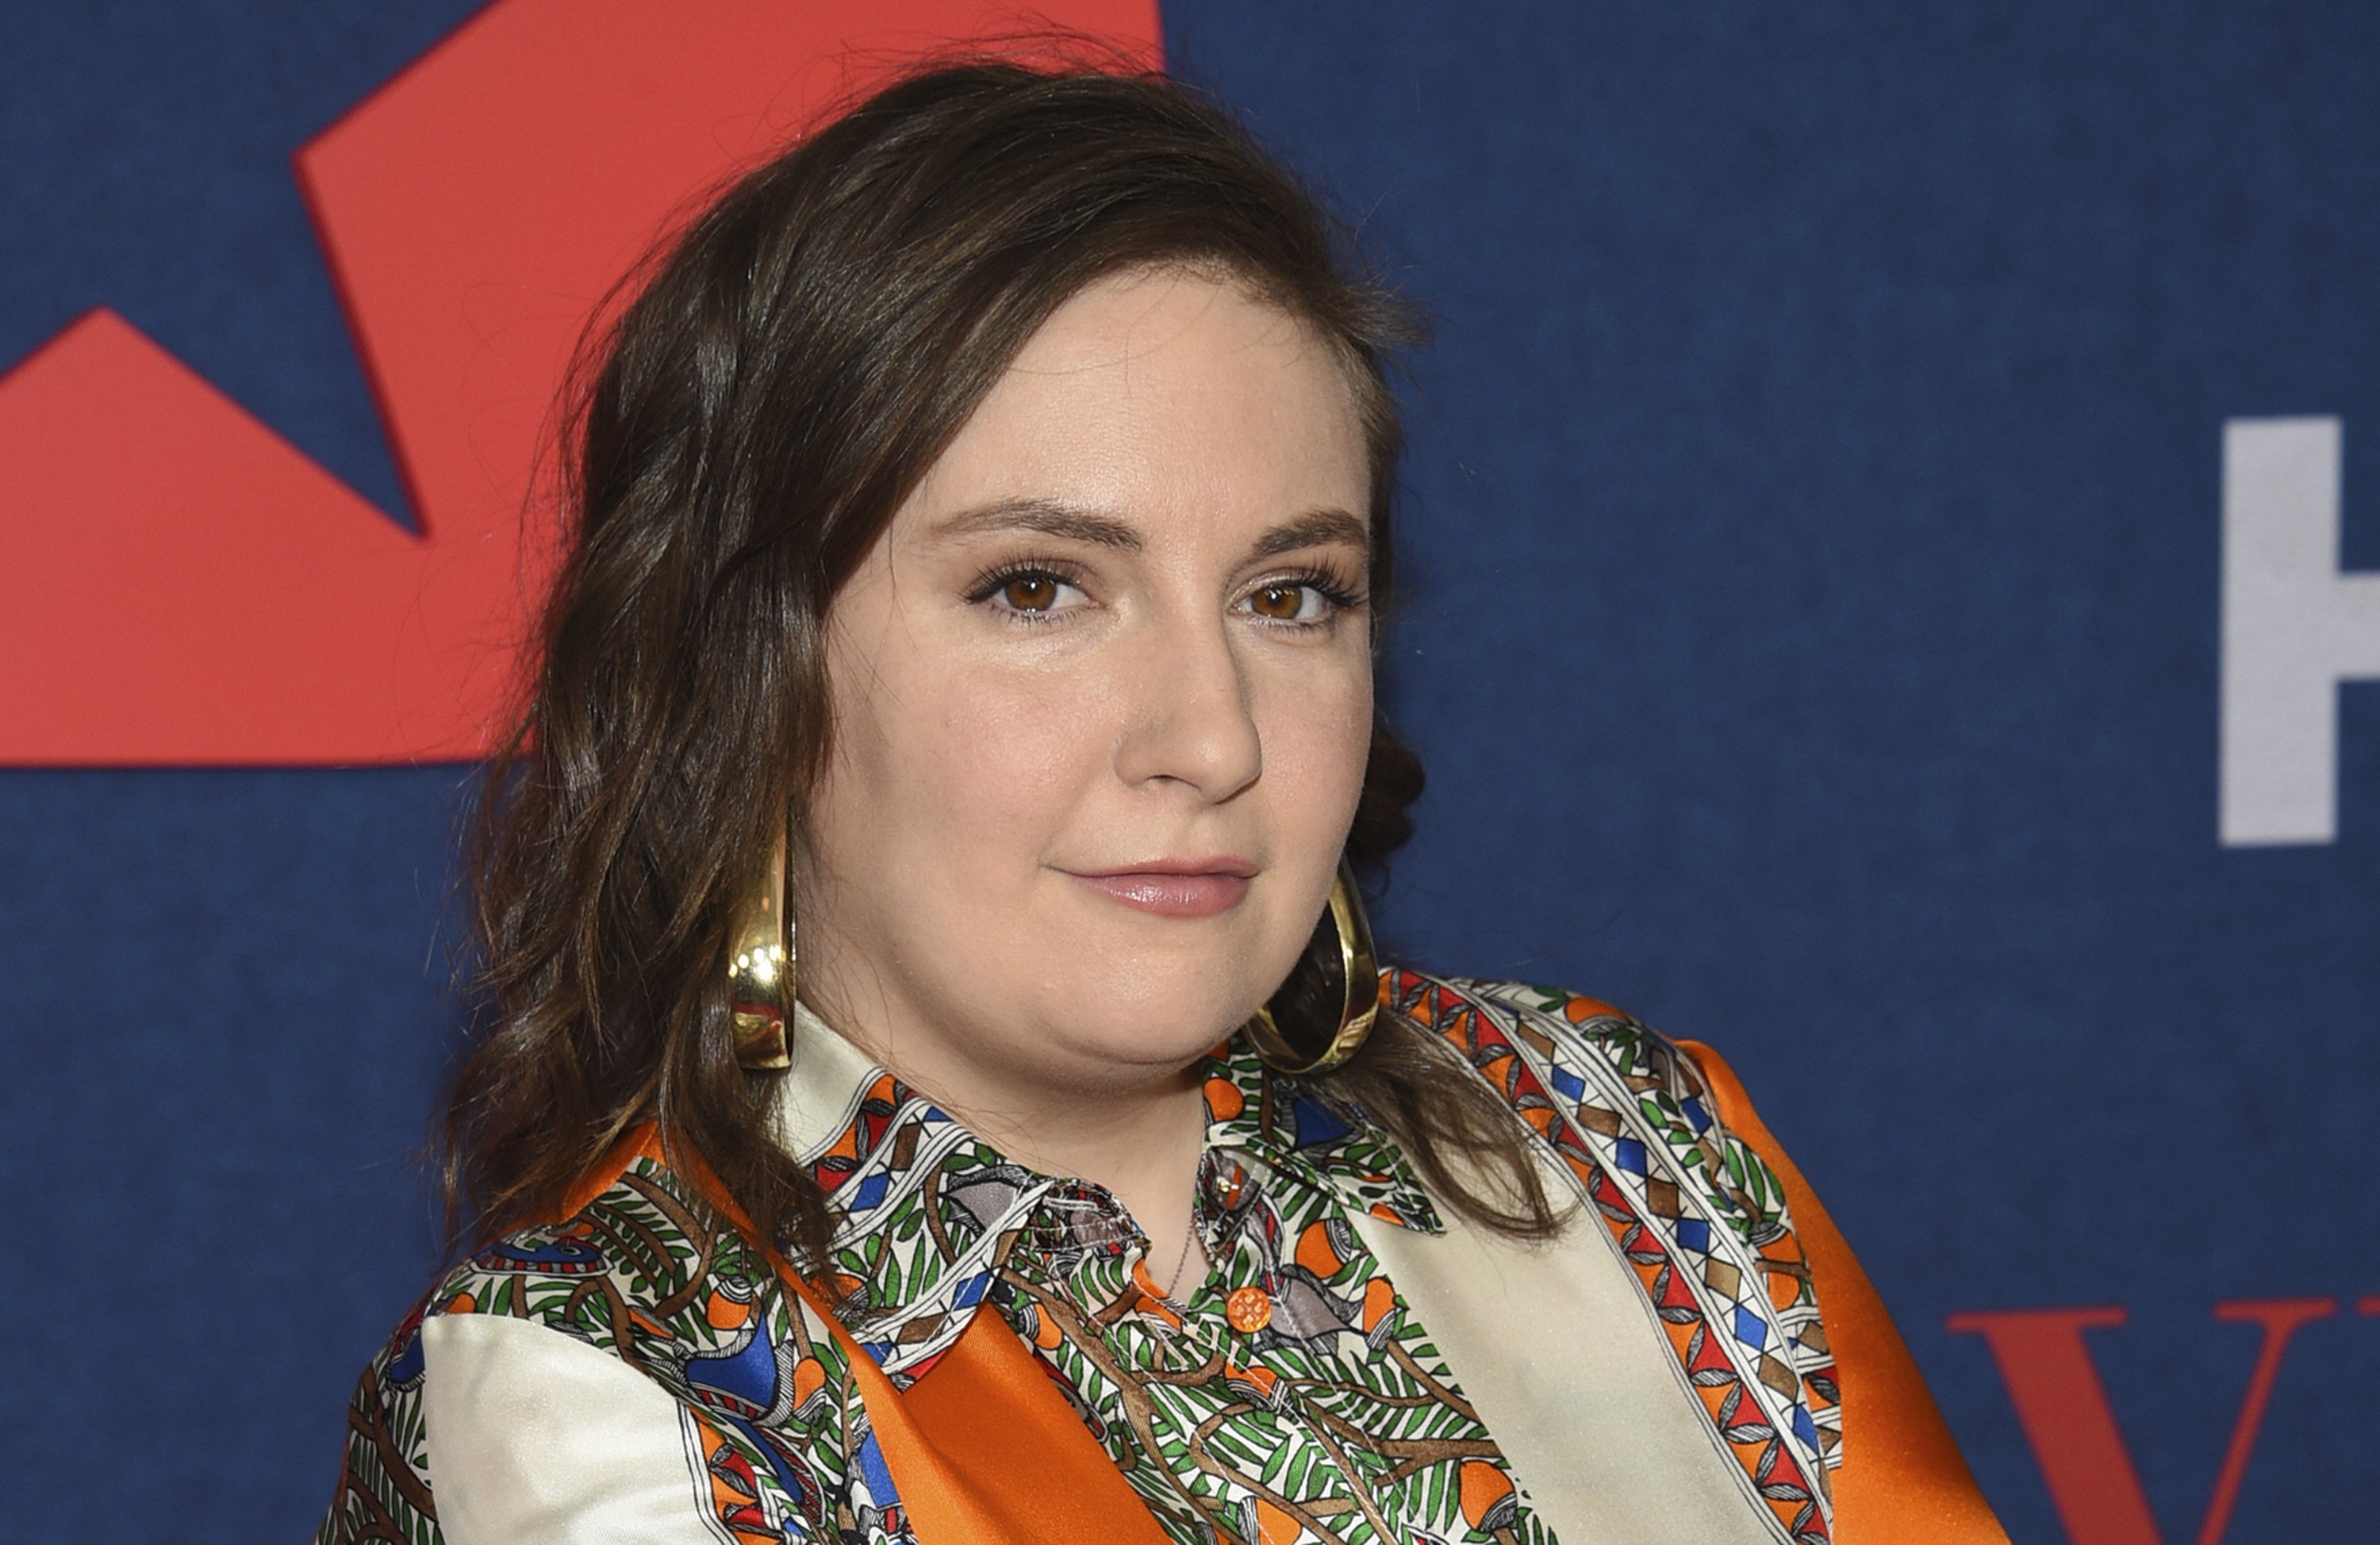 2. Lena Dunham Dyes Her Hair Blue, Says She's 'Gotta Have Fun' With It - wide 8